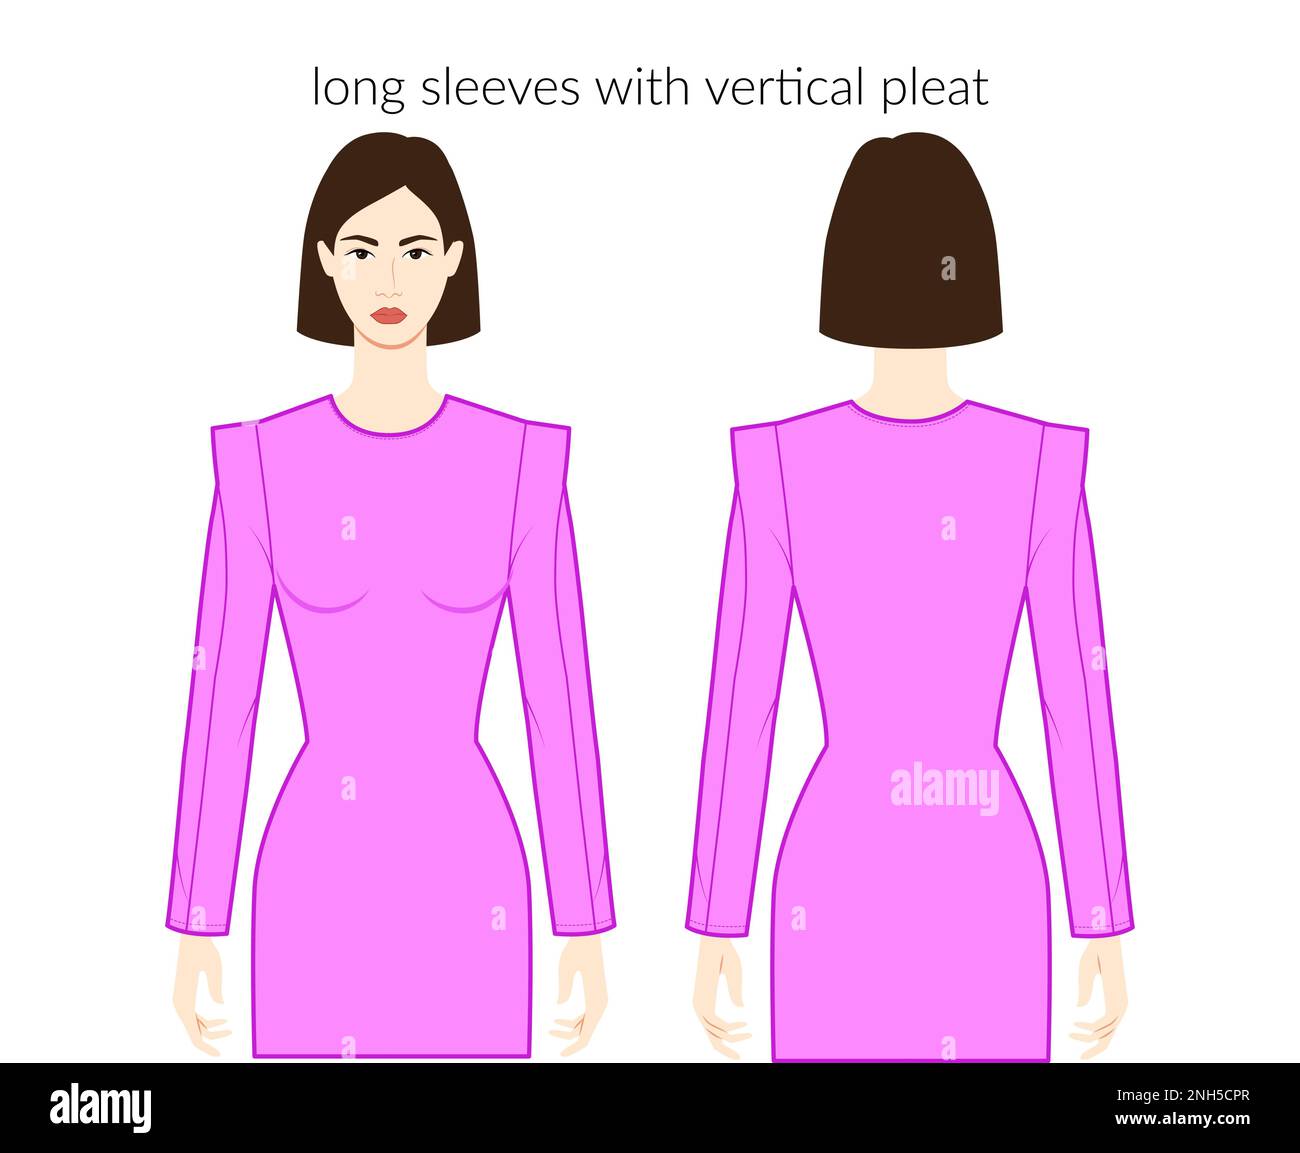 Vertical pleat sleeves long length clothes lady in magenta top, shirt ...